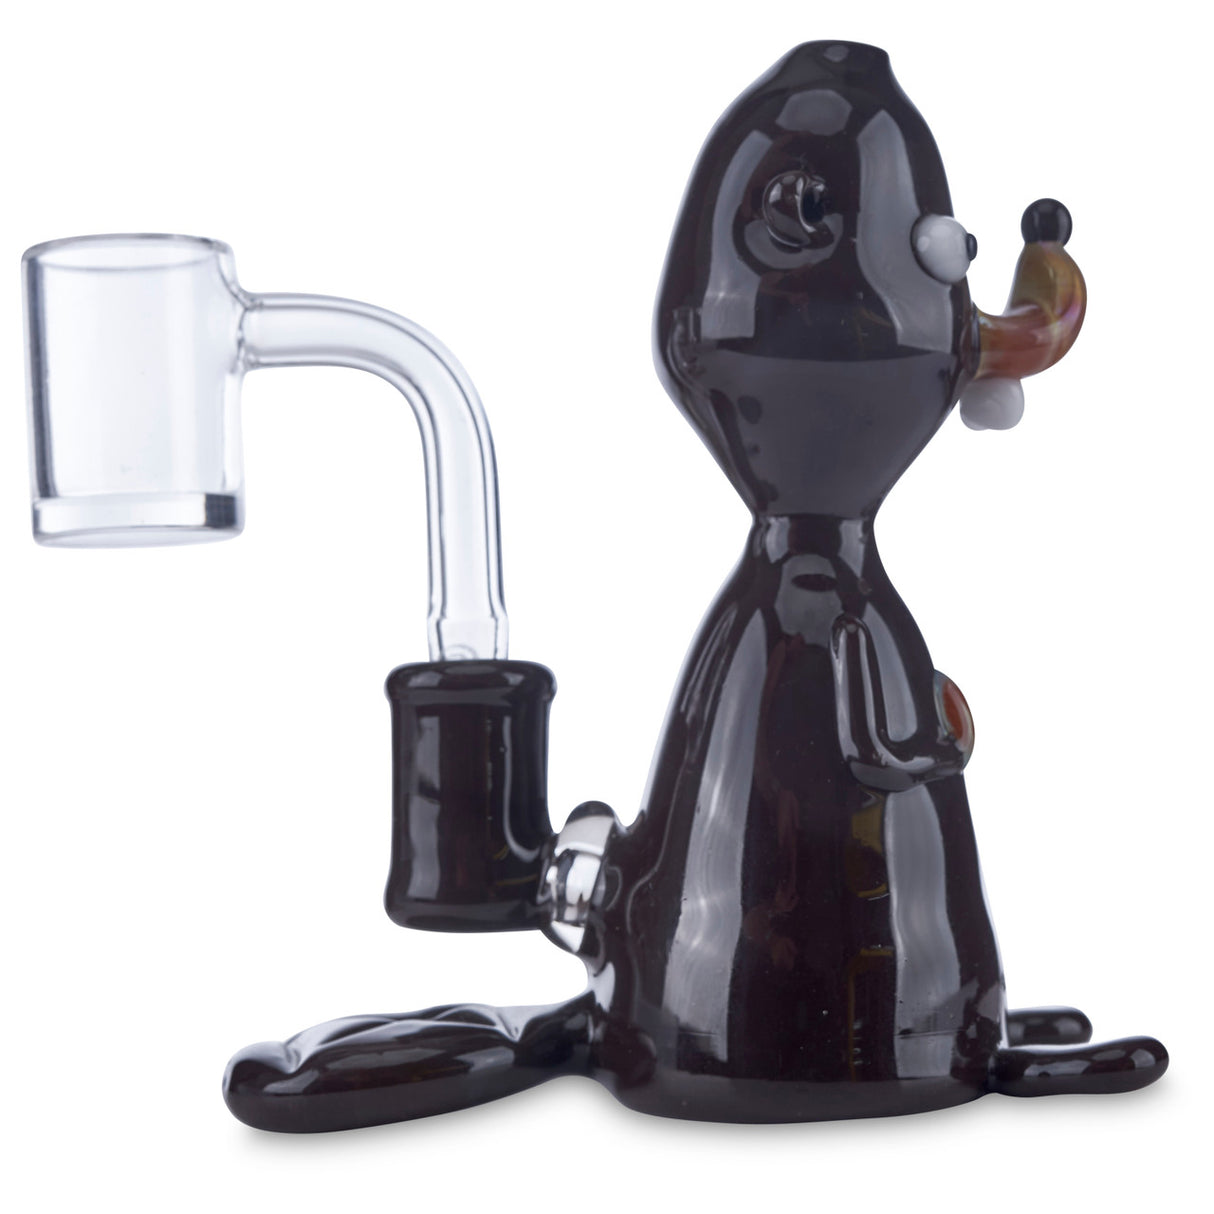 cap glass beaver banger hanger rig for concentrates or wax